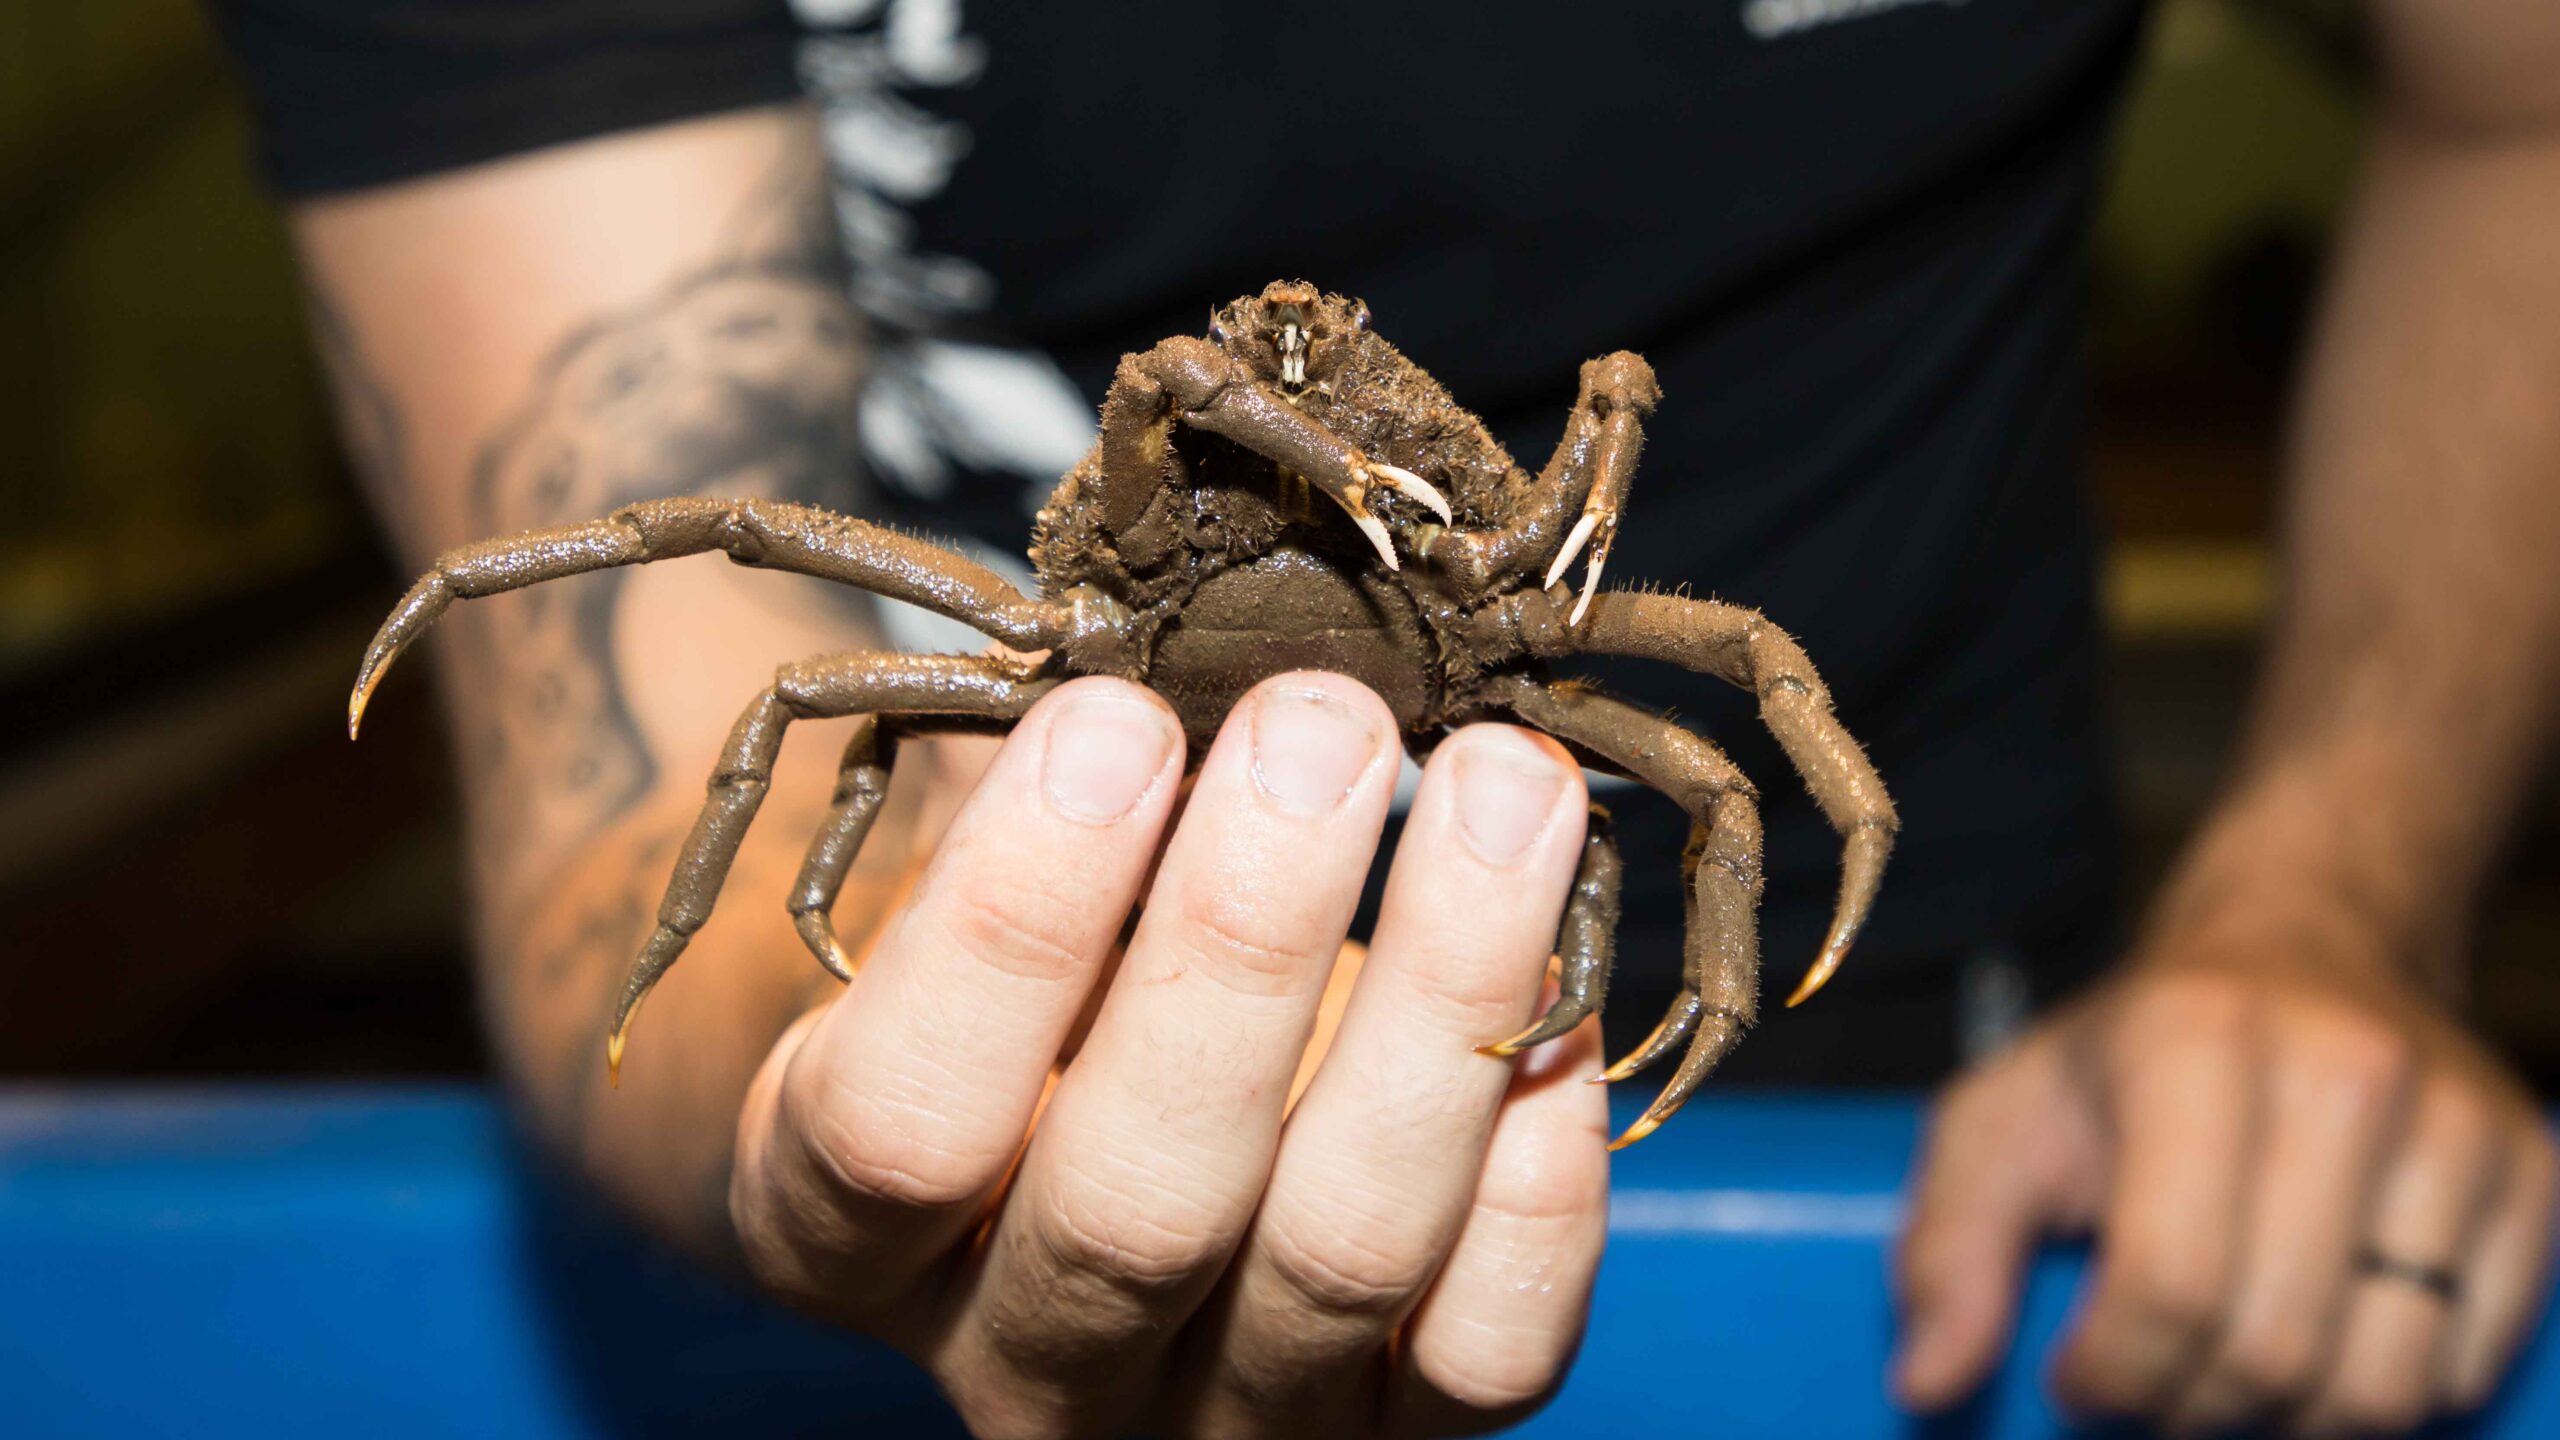 Scientist holding a spider crab (a 9 legged crab resembling a spider)